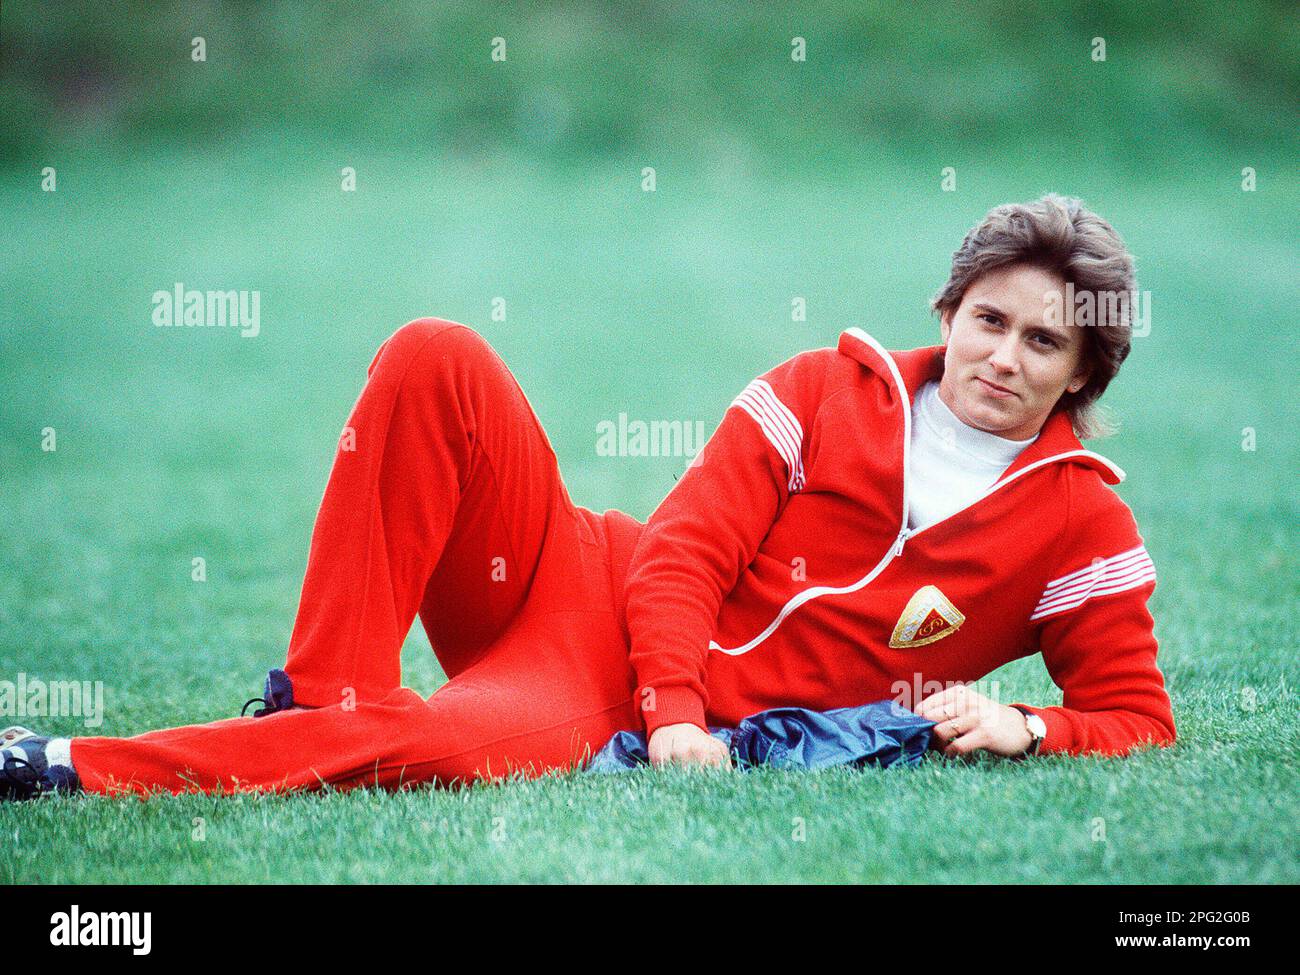 ARCHIVE PHOTO: Marlies GOEHR turns 65 on March 21, 2023, Marlies GOEHR GOHR, OELSNER, GDR, athlete, sits on the pitch in the park, private, at the World Championships in Athletics in Rome from August 29th to September 6th, 1987, ?SVEN SIMON, Princess-Luise-Str.41#45479 Muelheim/Ruhr#tel.0208/9413250#fax 0208/9413260#Kto 1428150 C ommerzbank E ssen BLZ 36040039 #www.SvenSimon.net#e-mail:SvenSimon@t-online .de. Stock Photo